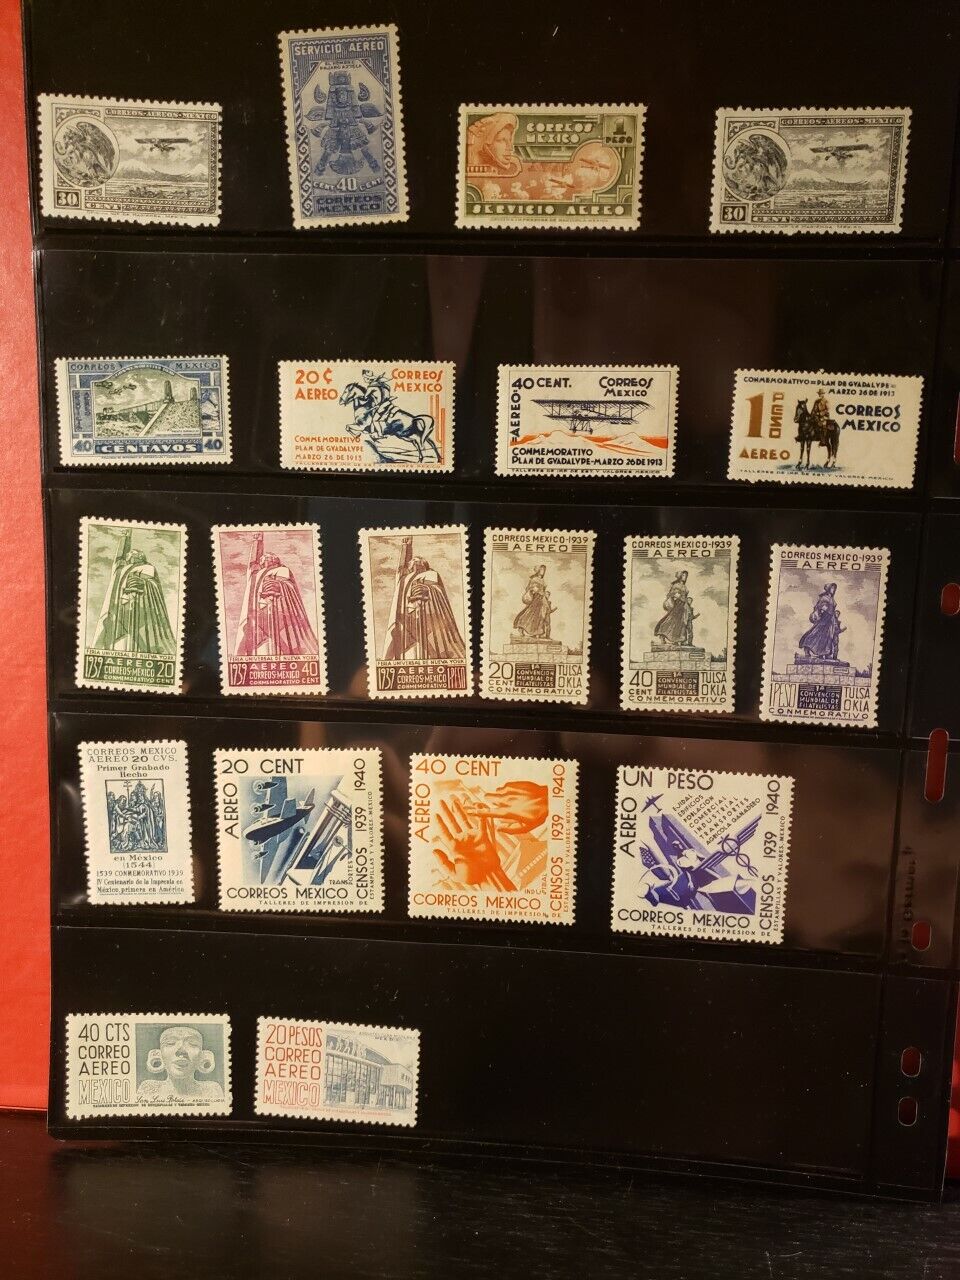 Mexico Airmail Stamps Lot of 39 - MNH - see details for list Без бренда - фотография #2